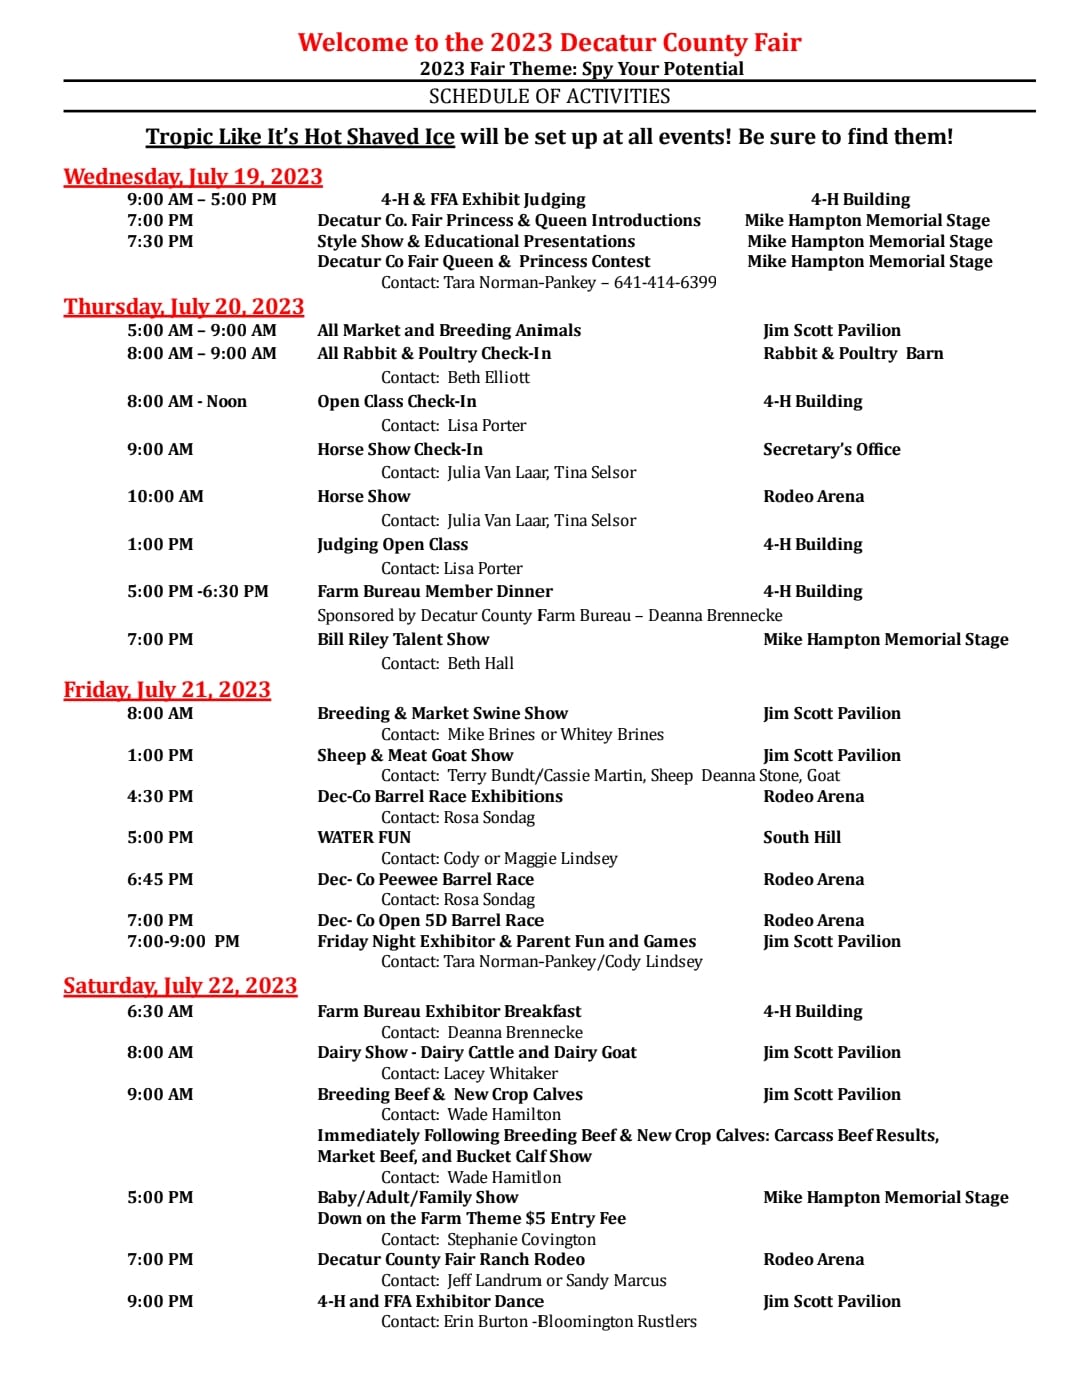 <h1 class="tribe-events-single-event-title">2023 Decatur County Fair Schedule July 19-22</h1>